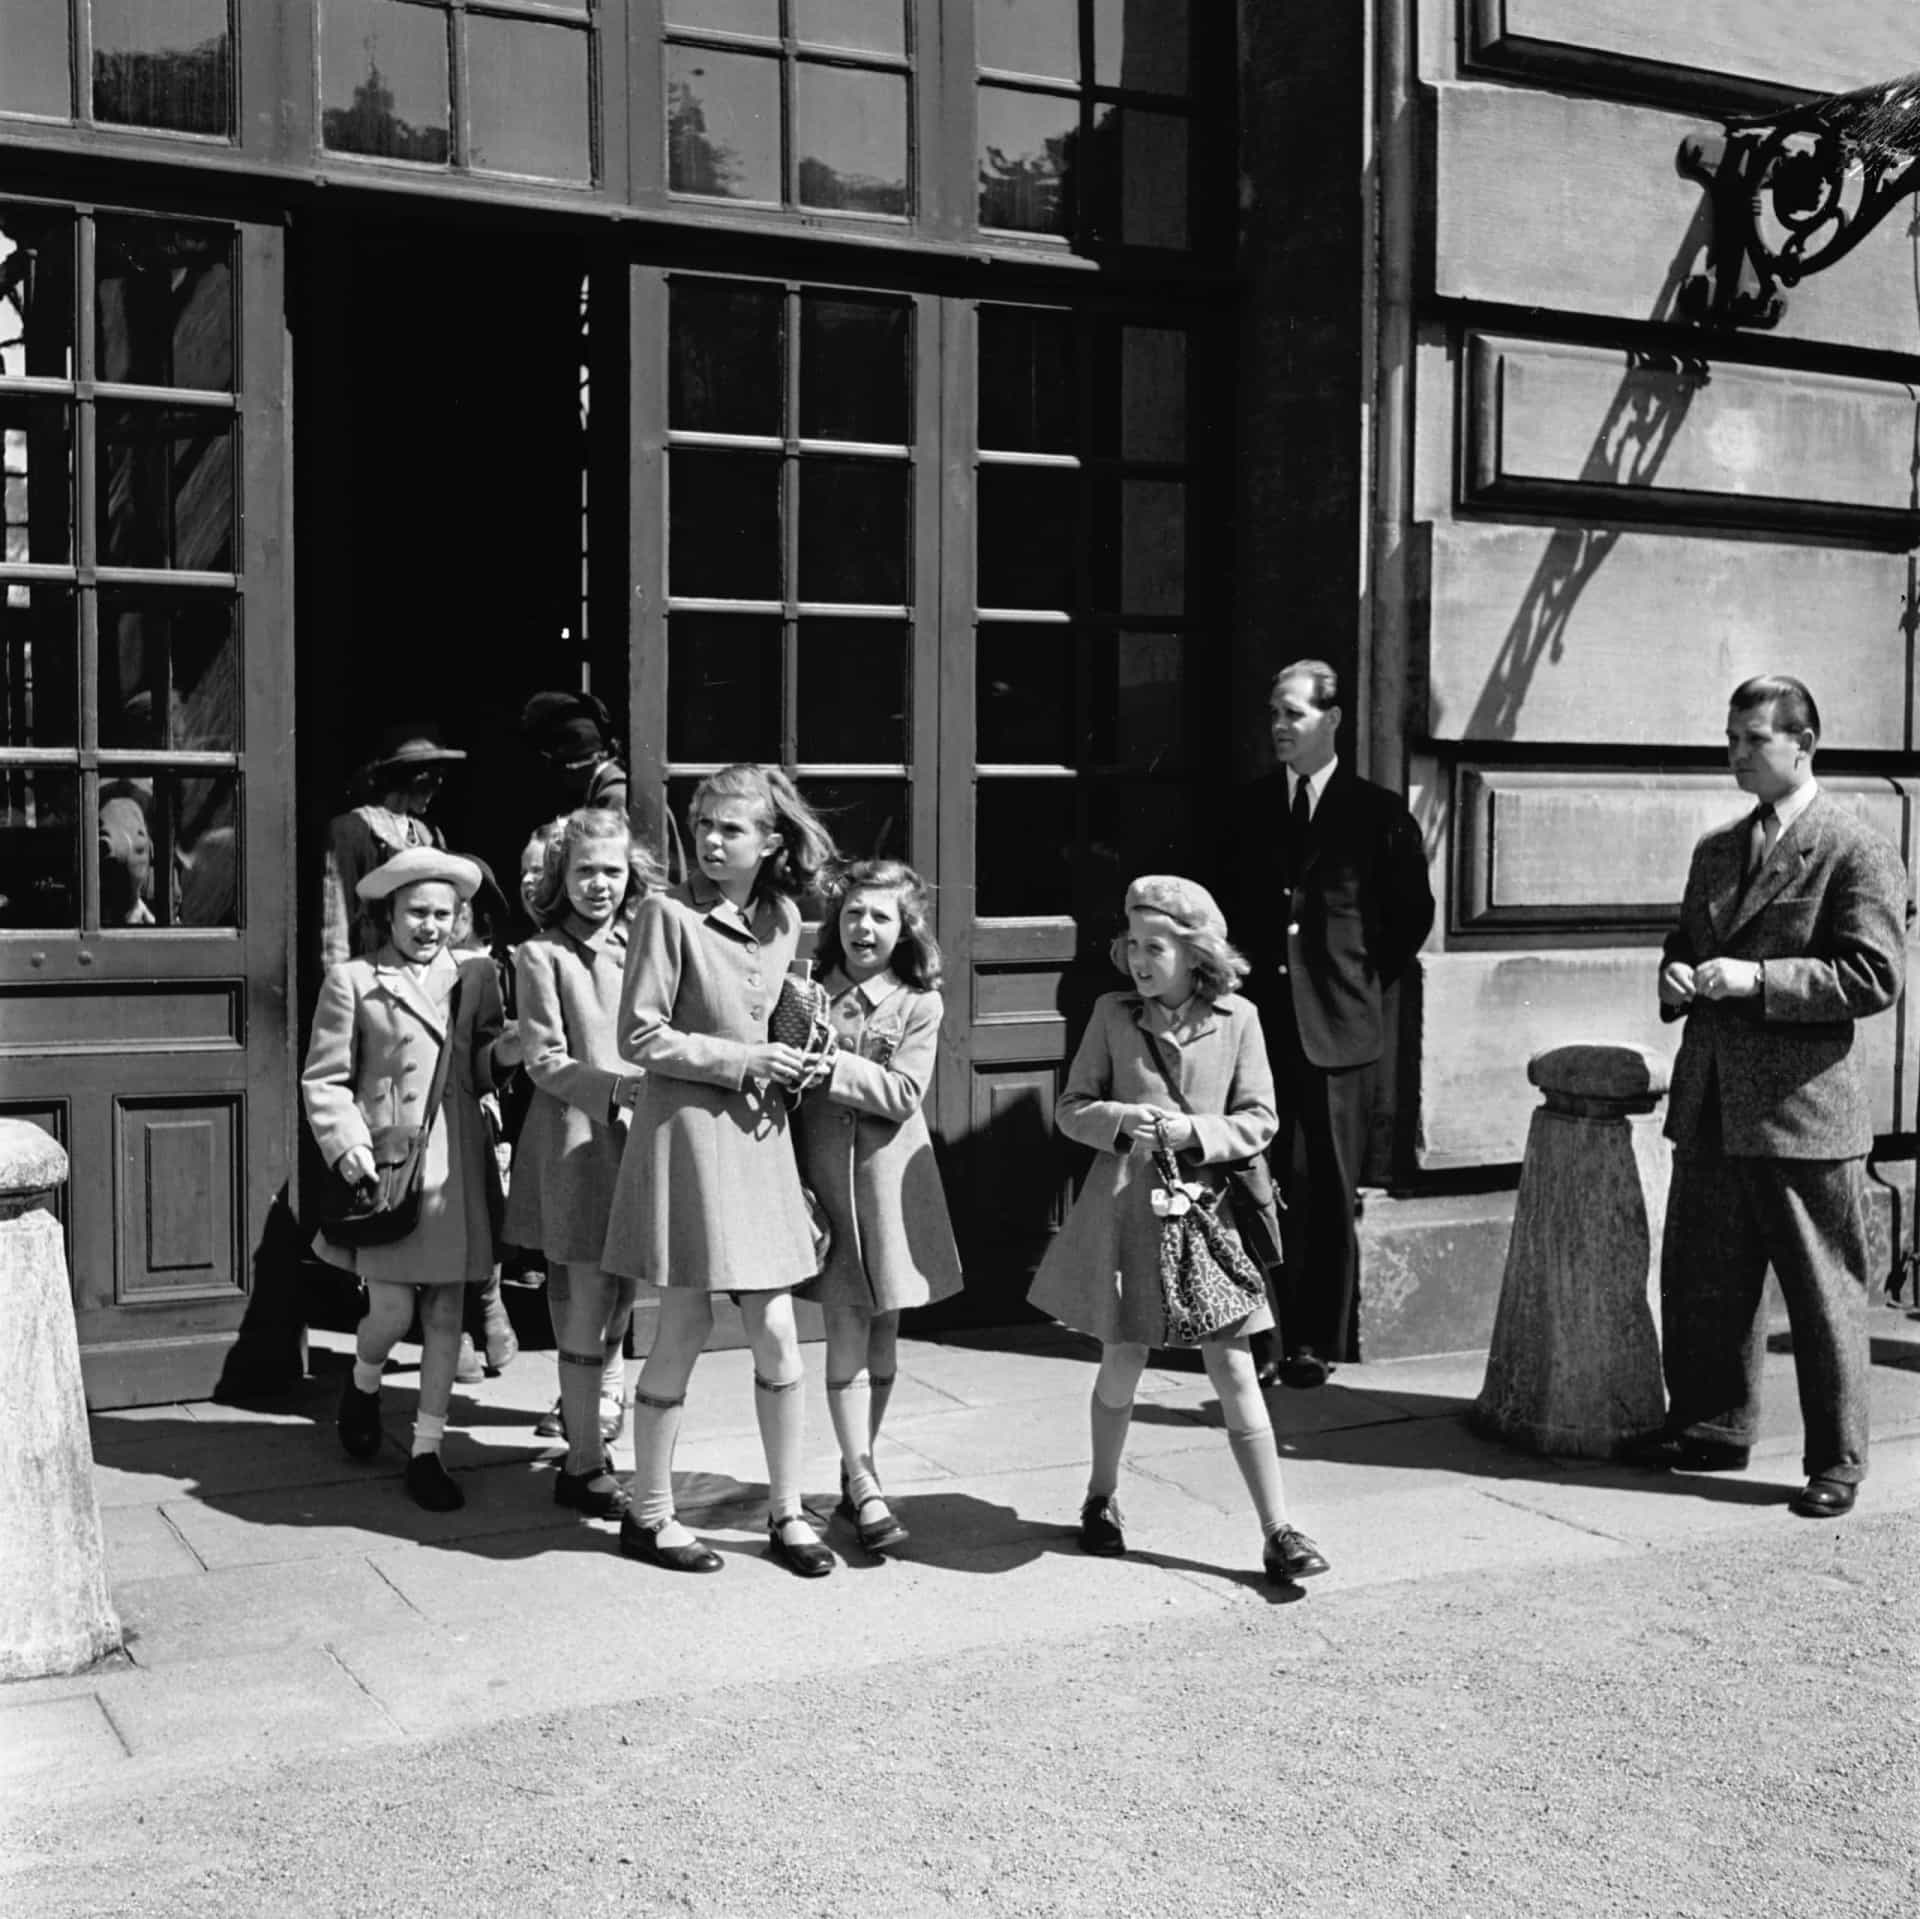 <p>The Swedish princesses Birgitta, Margaretha, and Desiree on their way from school in Stockholm on May 24, 1946.</p>